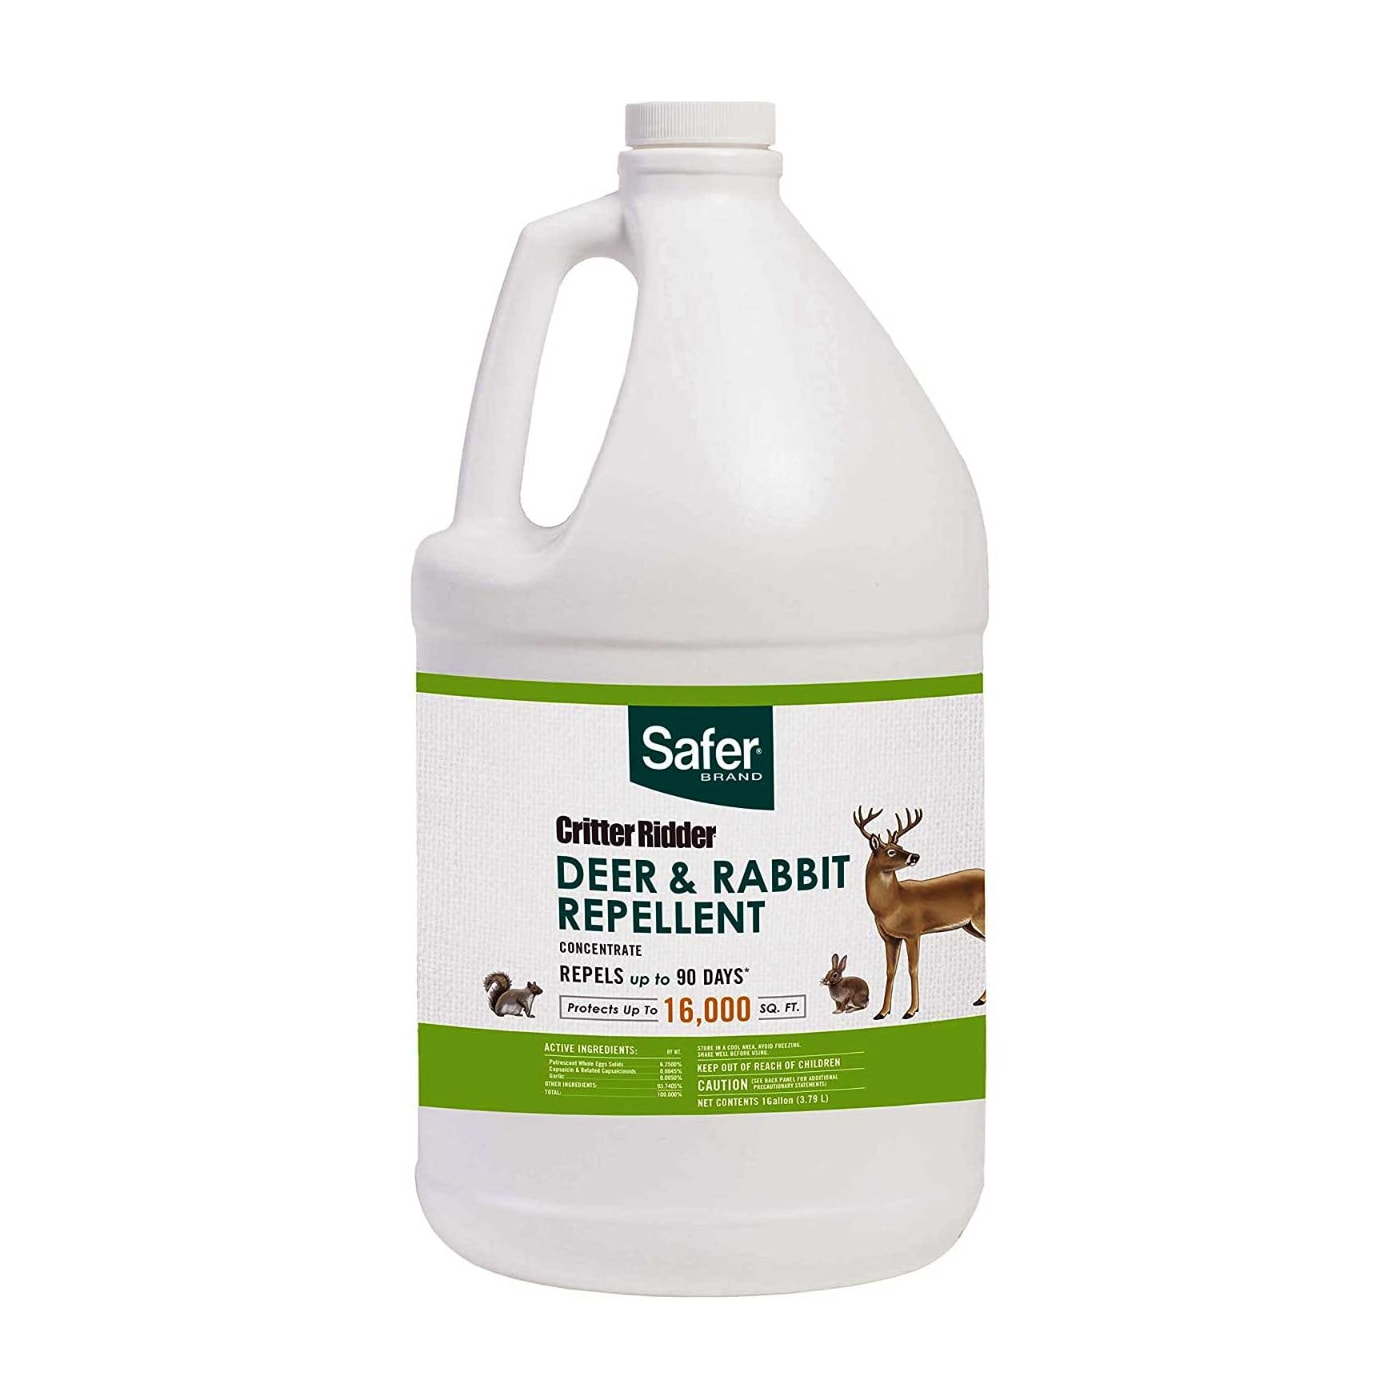 Safer Deer and Rabbit Repellent Concentrate